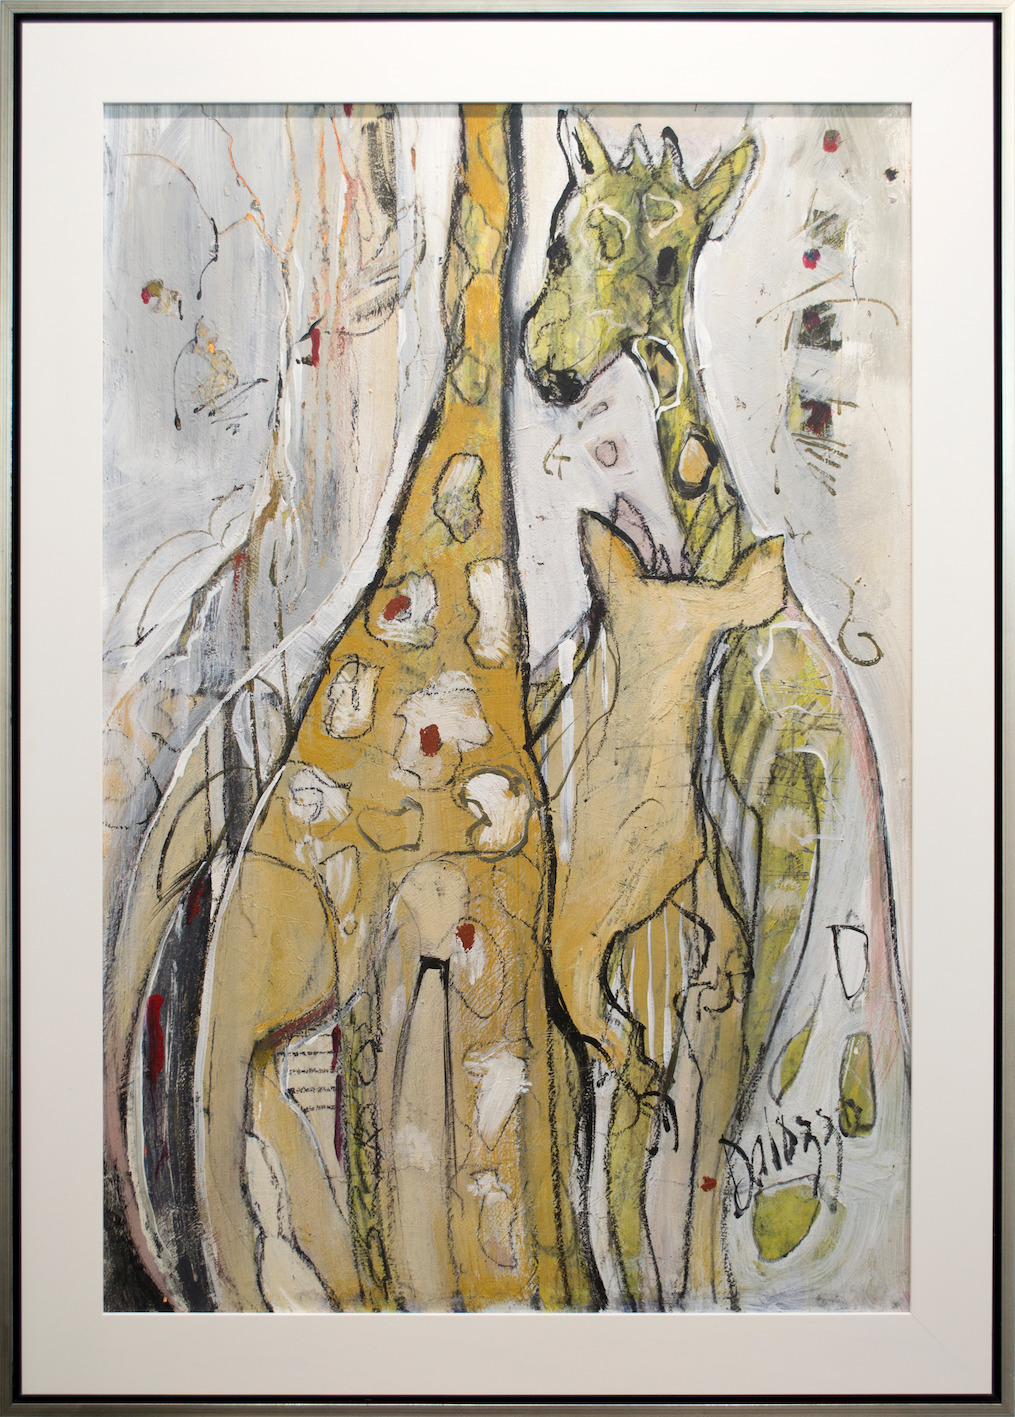 Framed Front View Of Animal Painting "Giraffidae Family" By Lucette Dalozzo